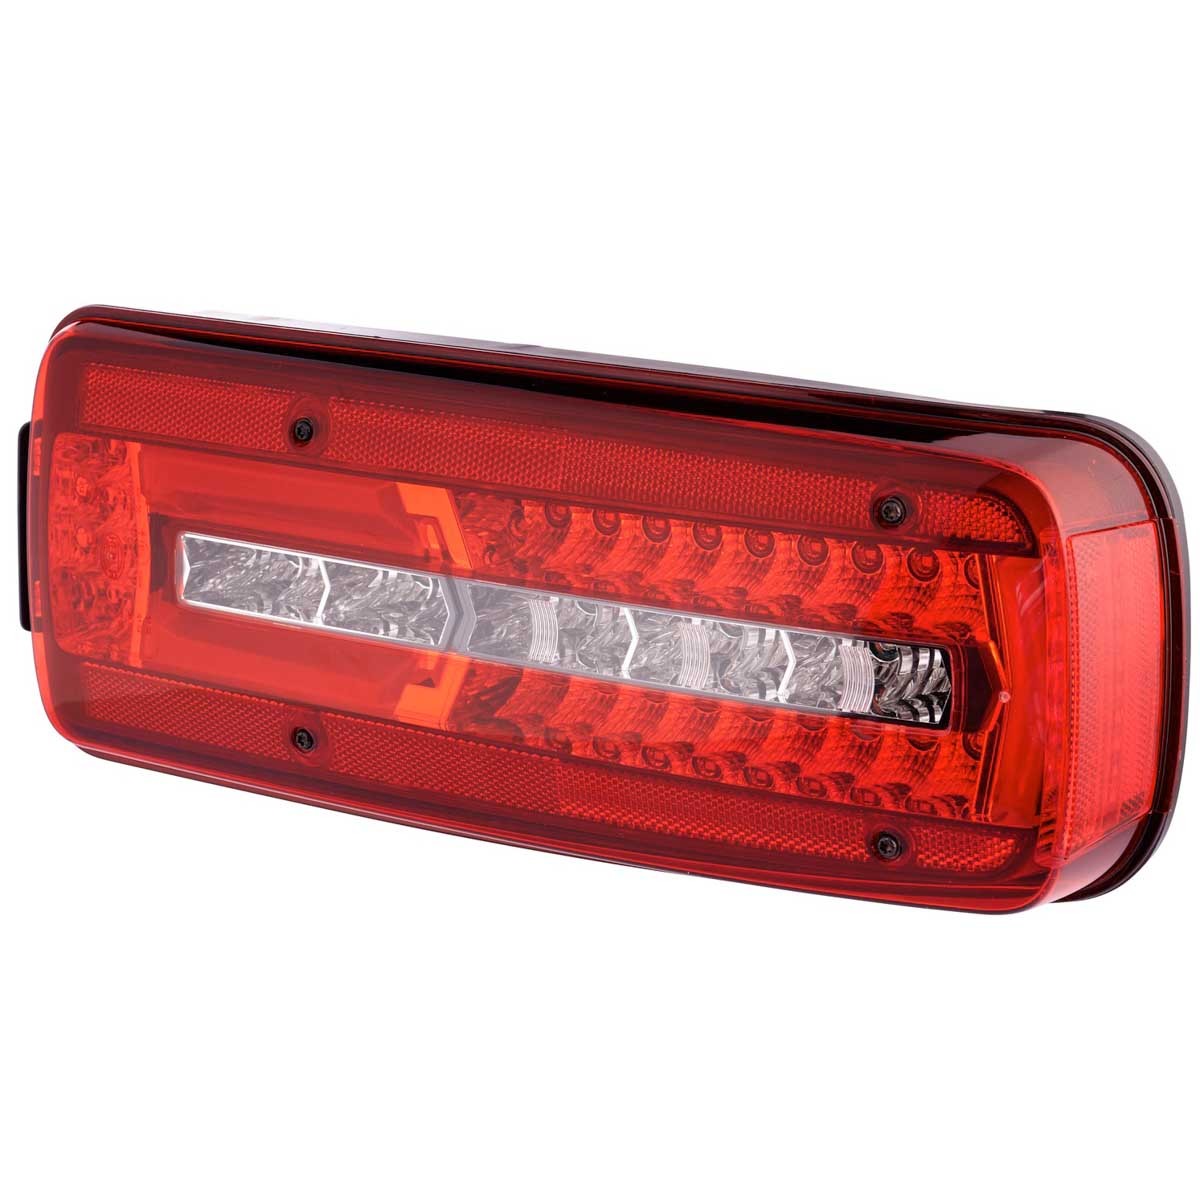 HELLA 2VP 012 381-021 Rear light Right, LED, black, 24V, Crystal clear, red, Electromagnetic Compatibility (EMC), with bolts/screws